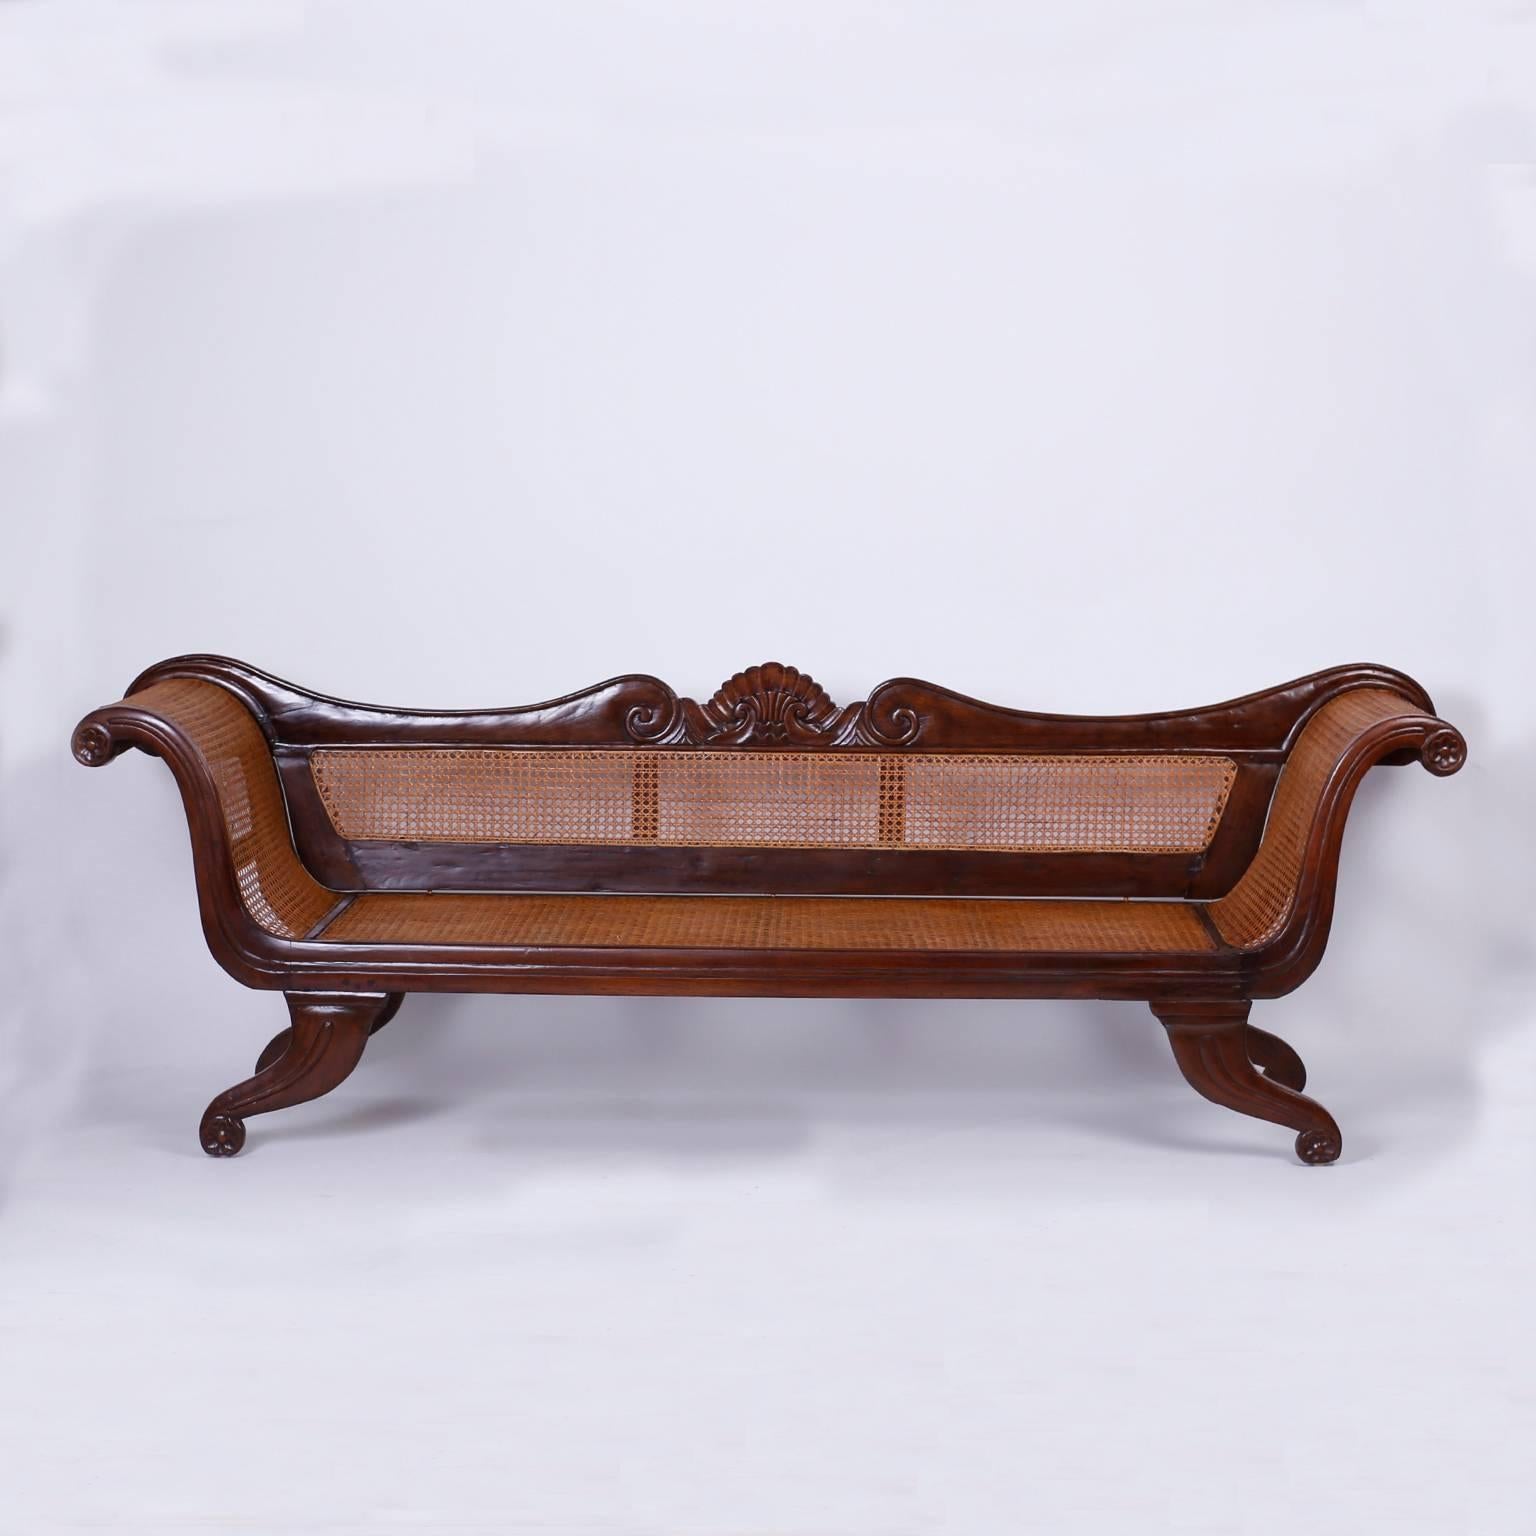 Fine antique British colonial settee with a graceful poetic form. The mahogany frame is beautifully carved with waves and seashells on paw feet. The back, seat, and arms are hand caned typical of tropical furniture of the West Indies. The